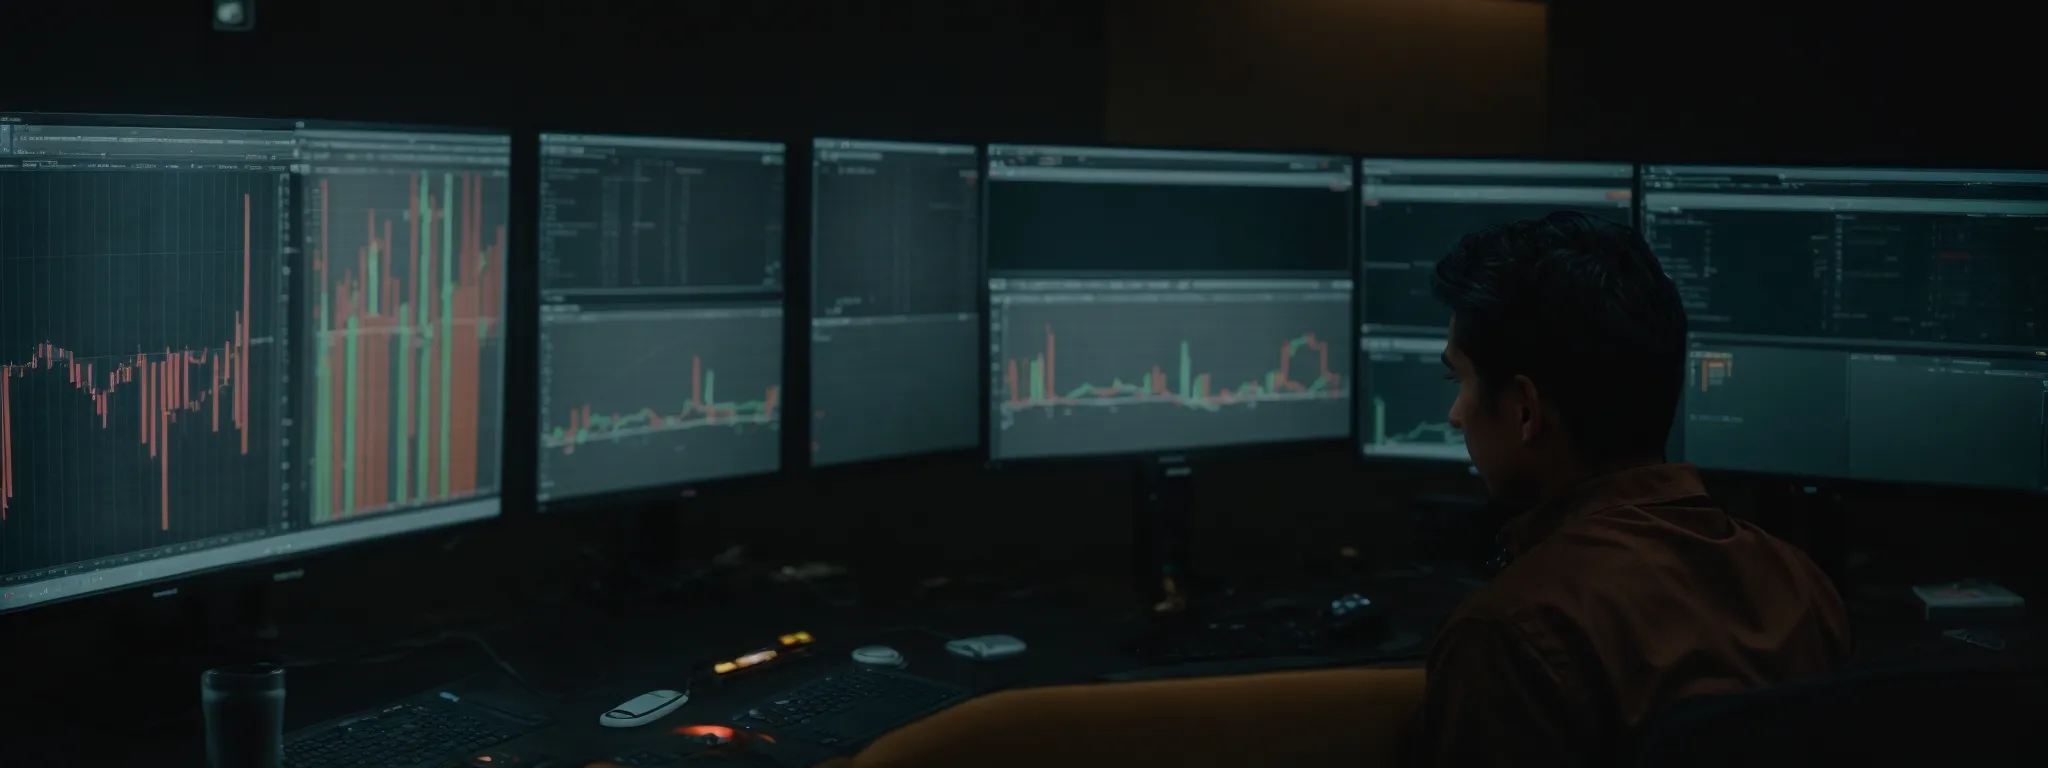 a person sitting in front of multiple computer monitors displaying analytics and website data.